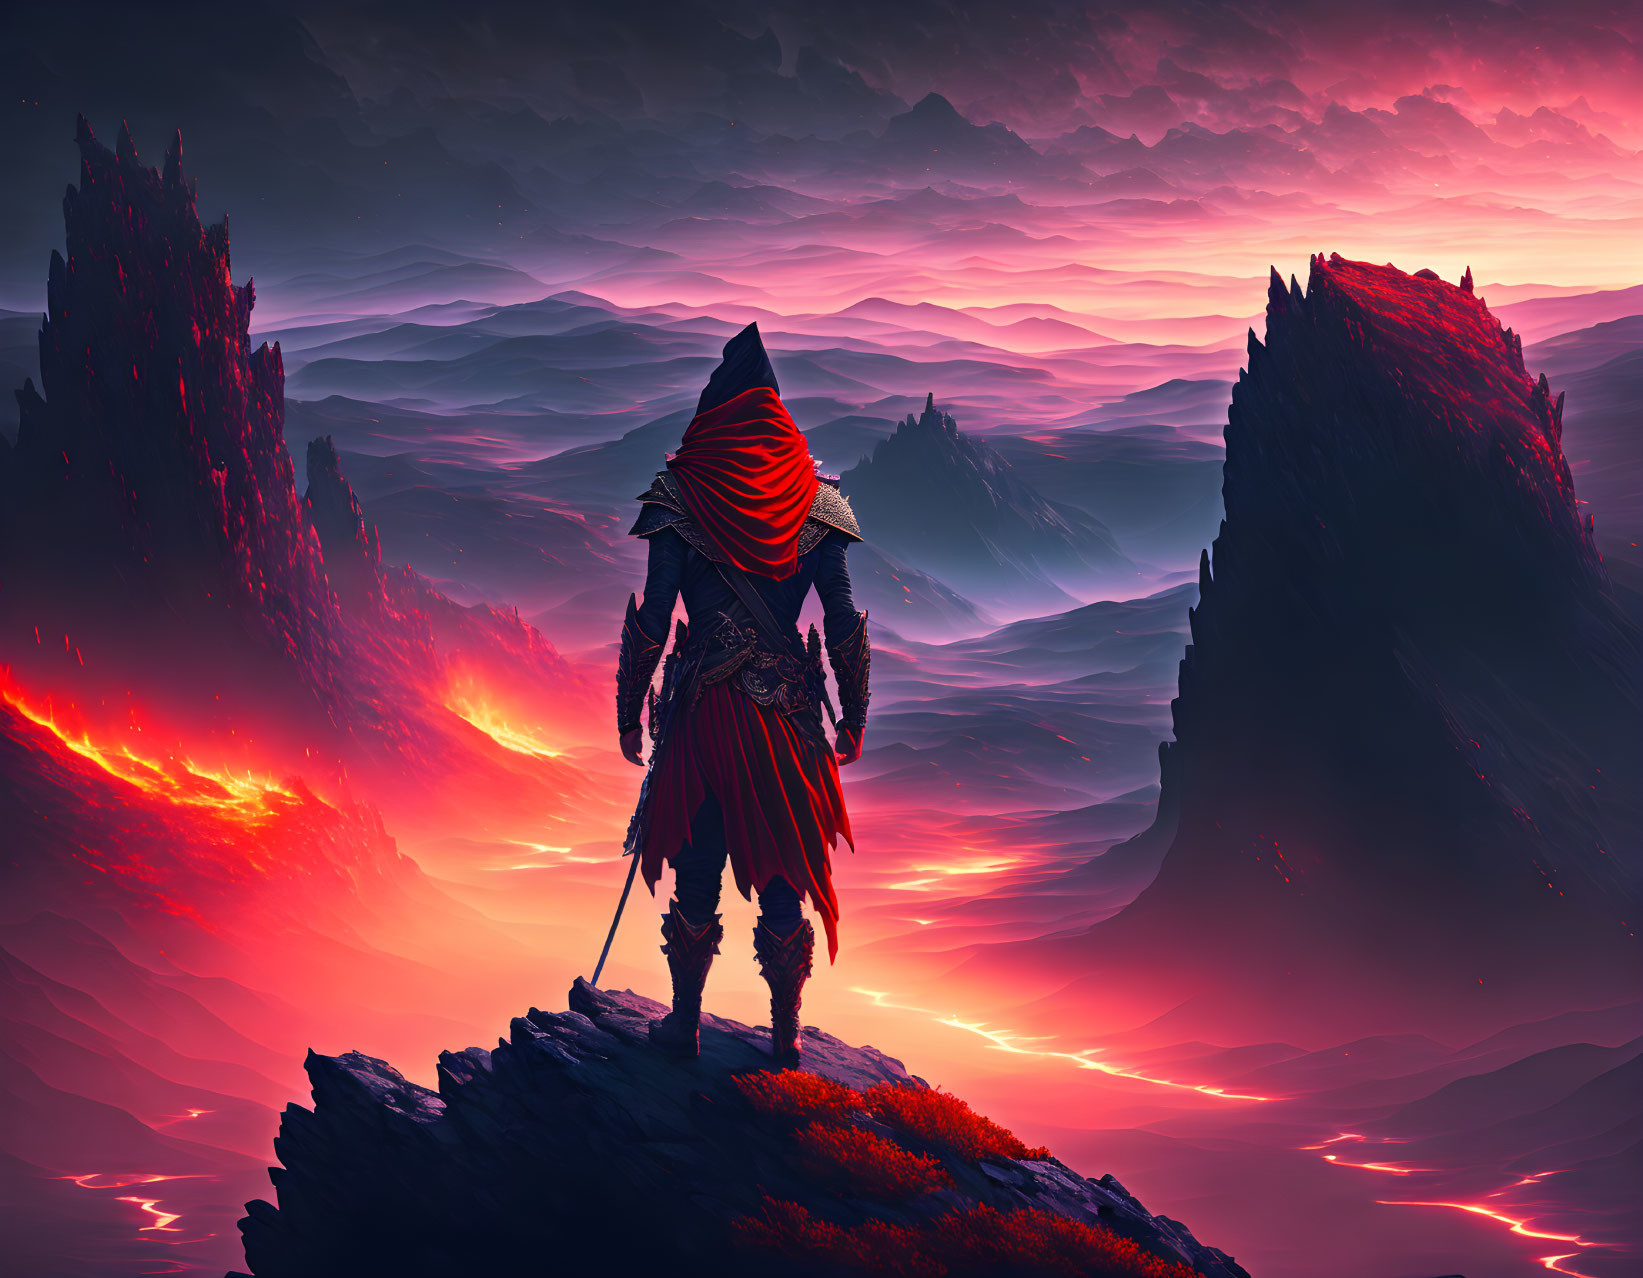 Cloaked figure on cliff gazes at surreal lava landscape